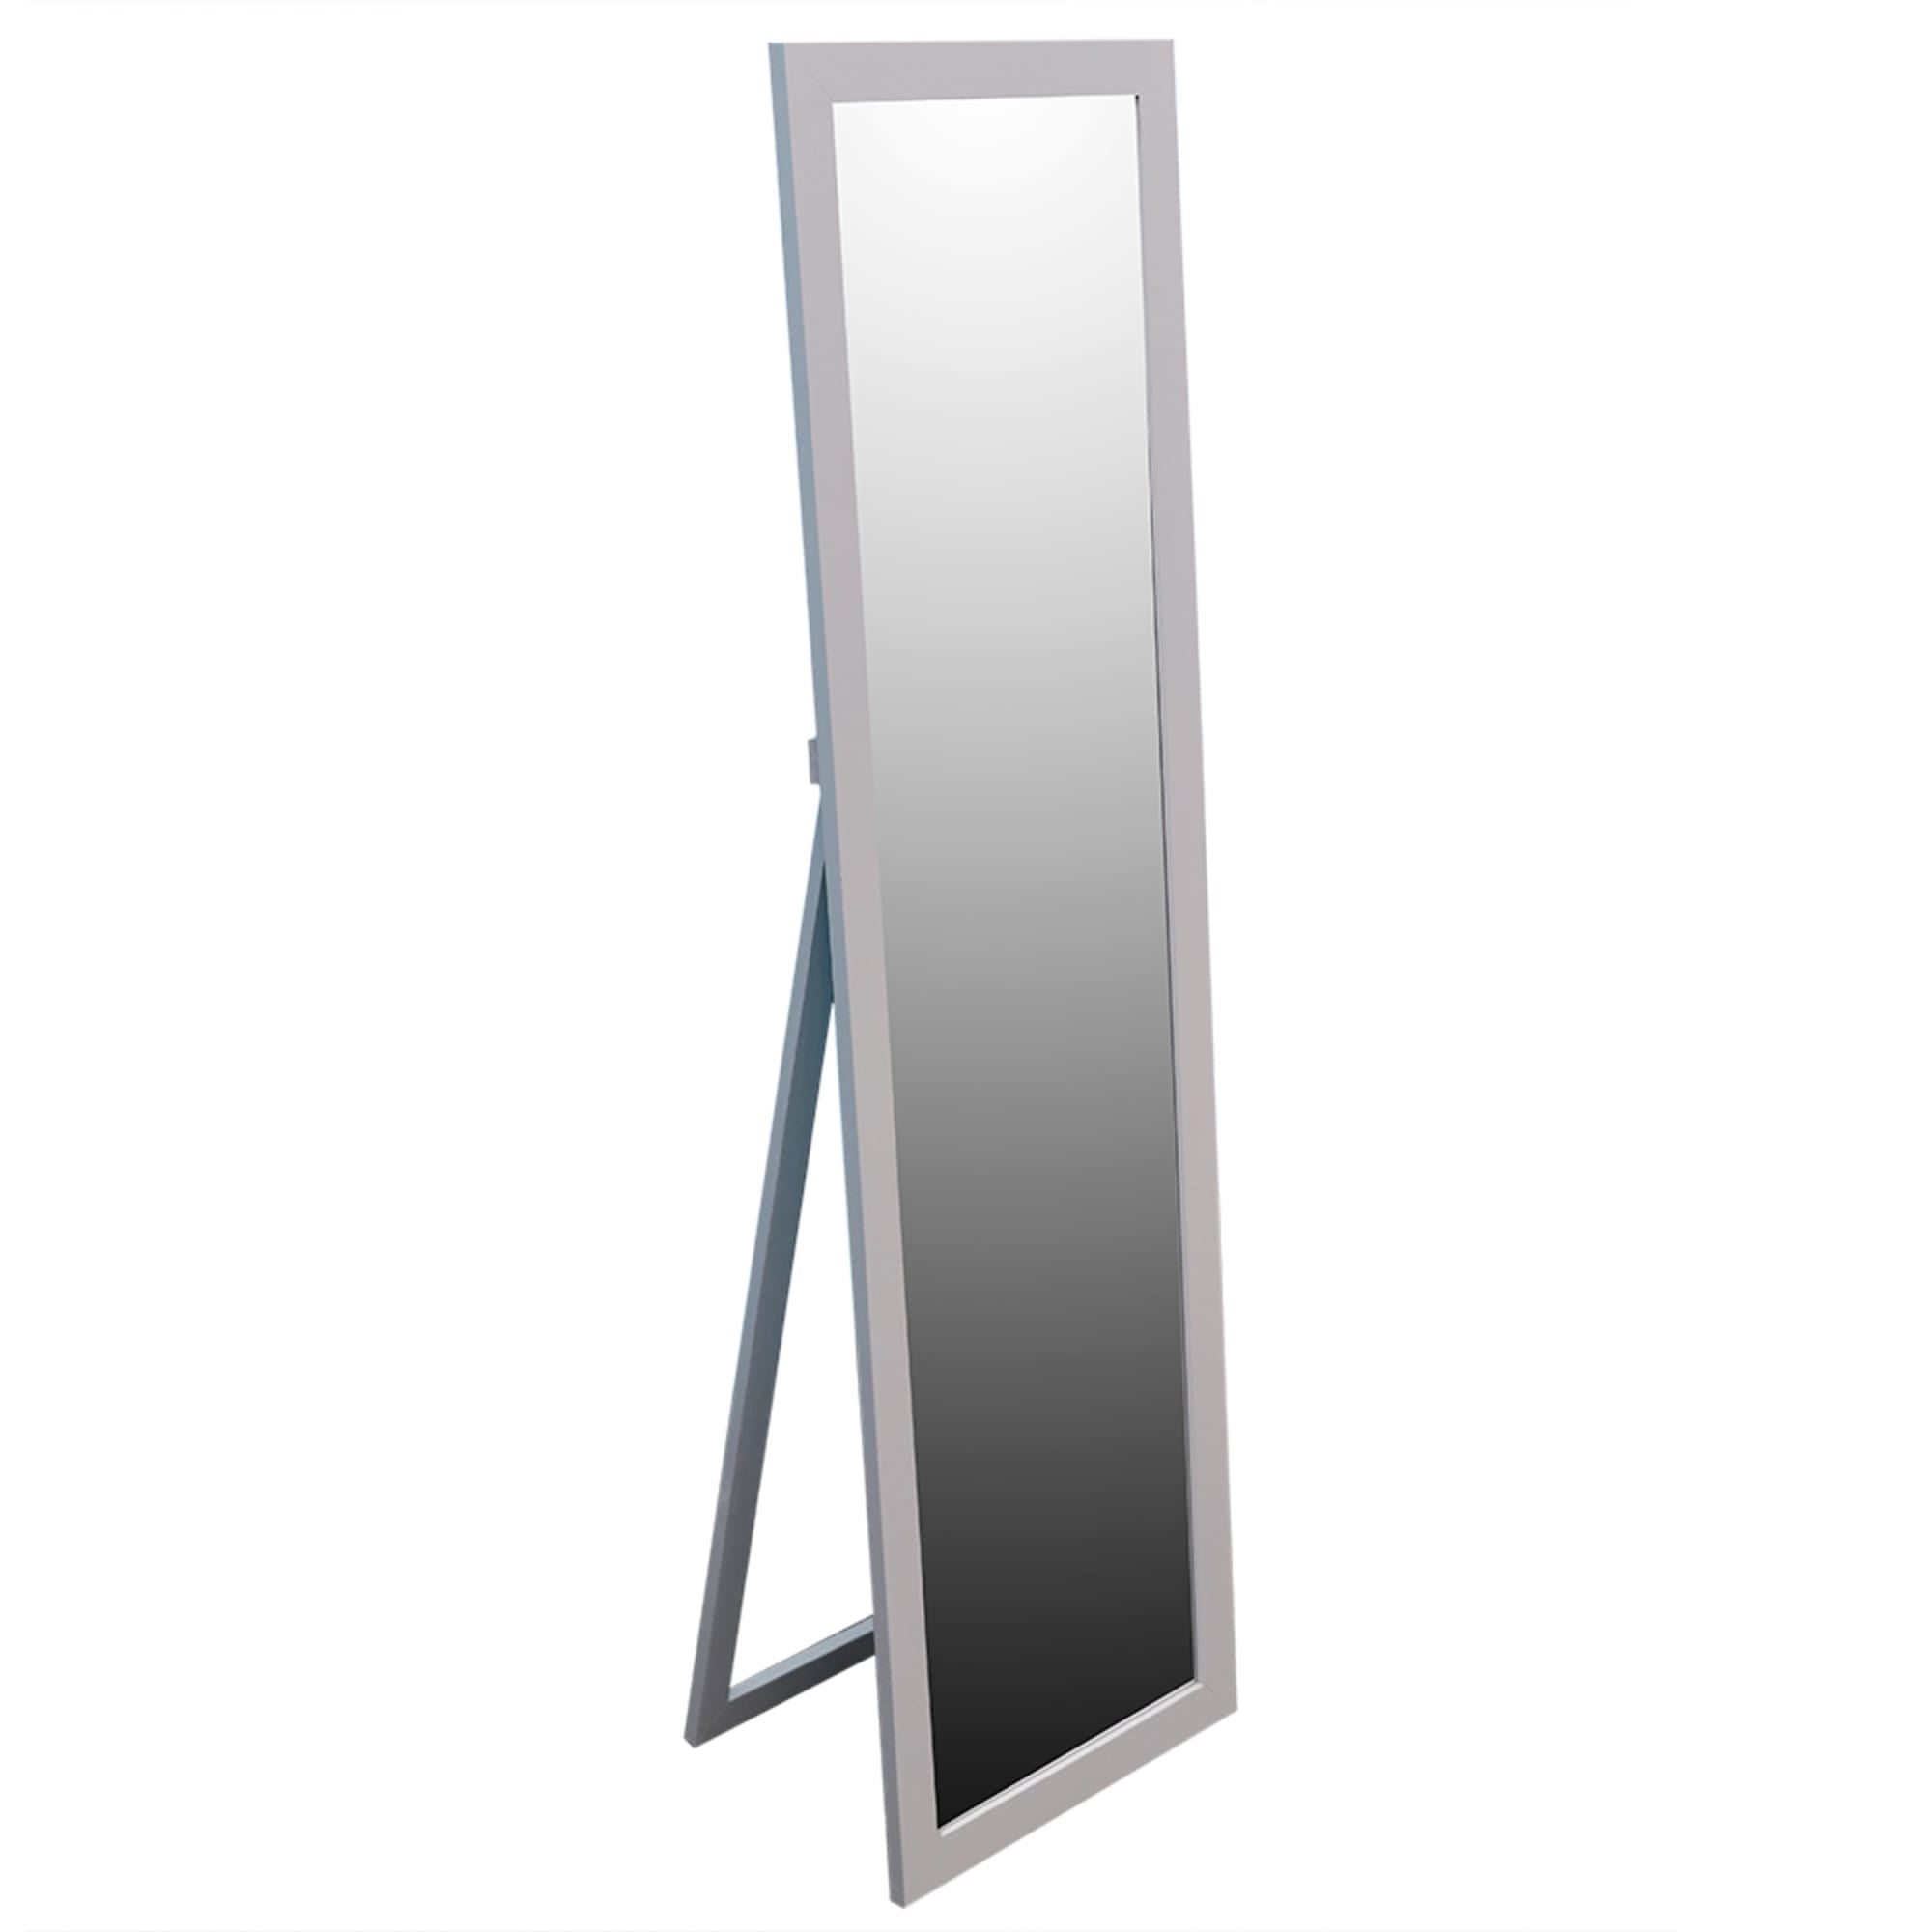 11” x 47” Easel Back Full Length Mirror with MDF Frame, Grey